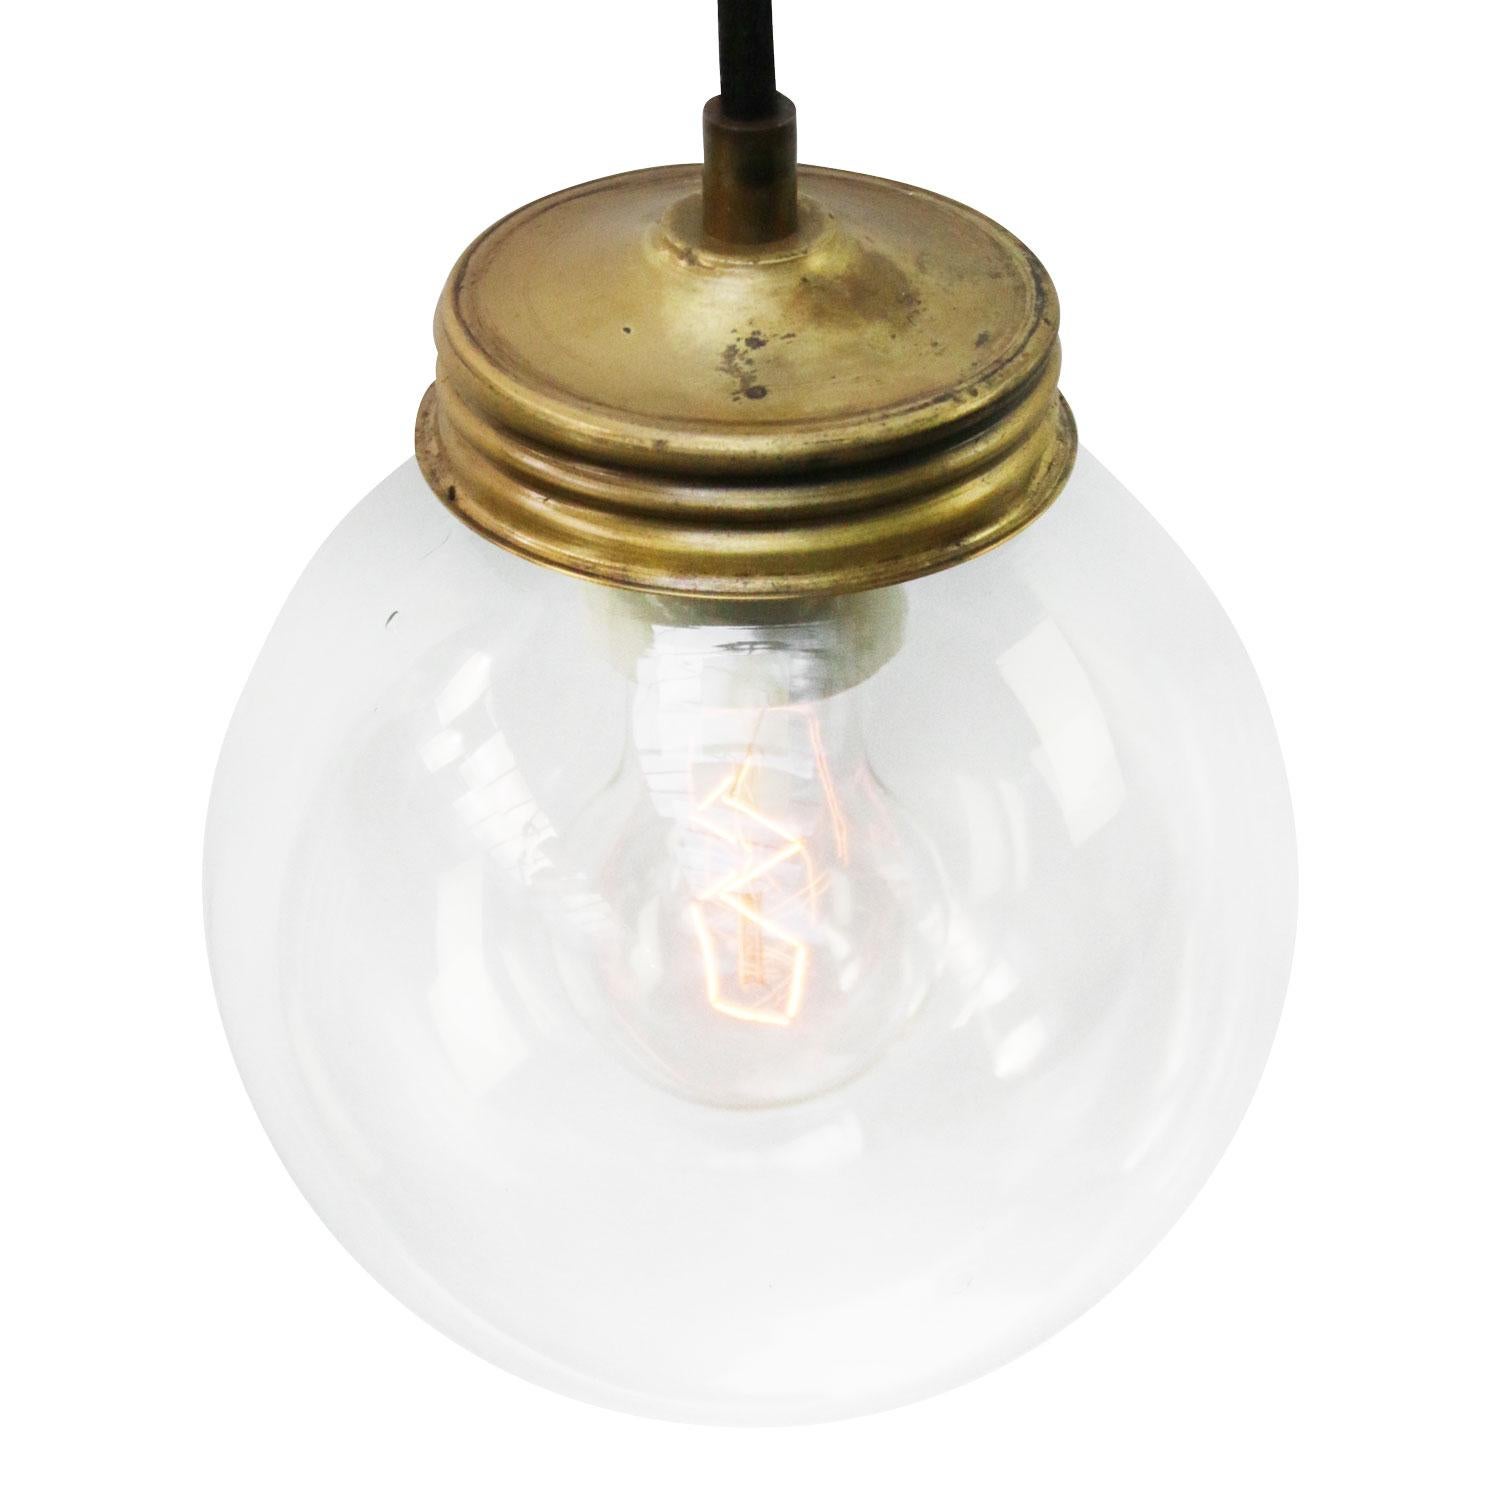 Vintage mid-century brass hanging lamp.
Brass and round clear glass.
3 conductors, including ground wire.

Weight: 0.80 kg / 1.8 lb

Priced per individual item. All lamps have been made suitable by international standards for incandescent